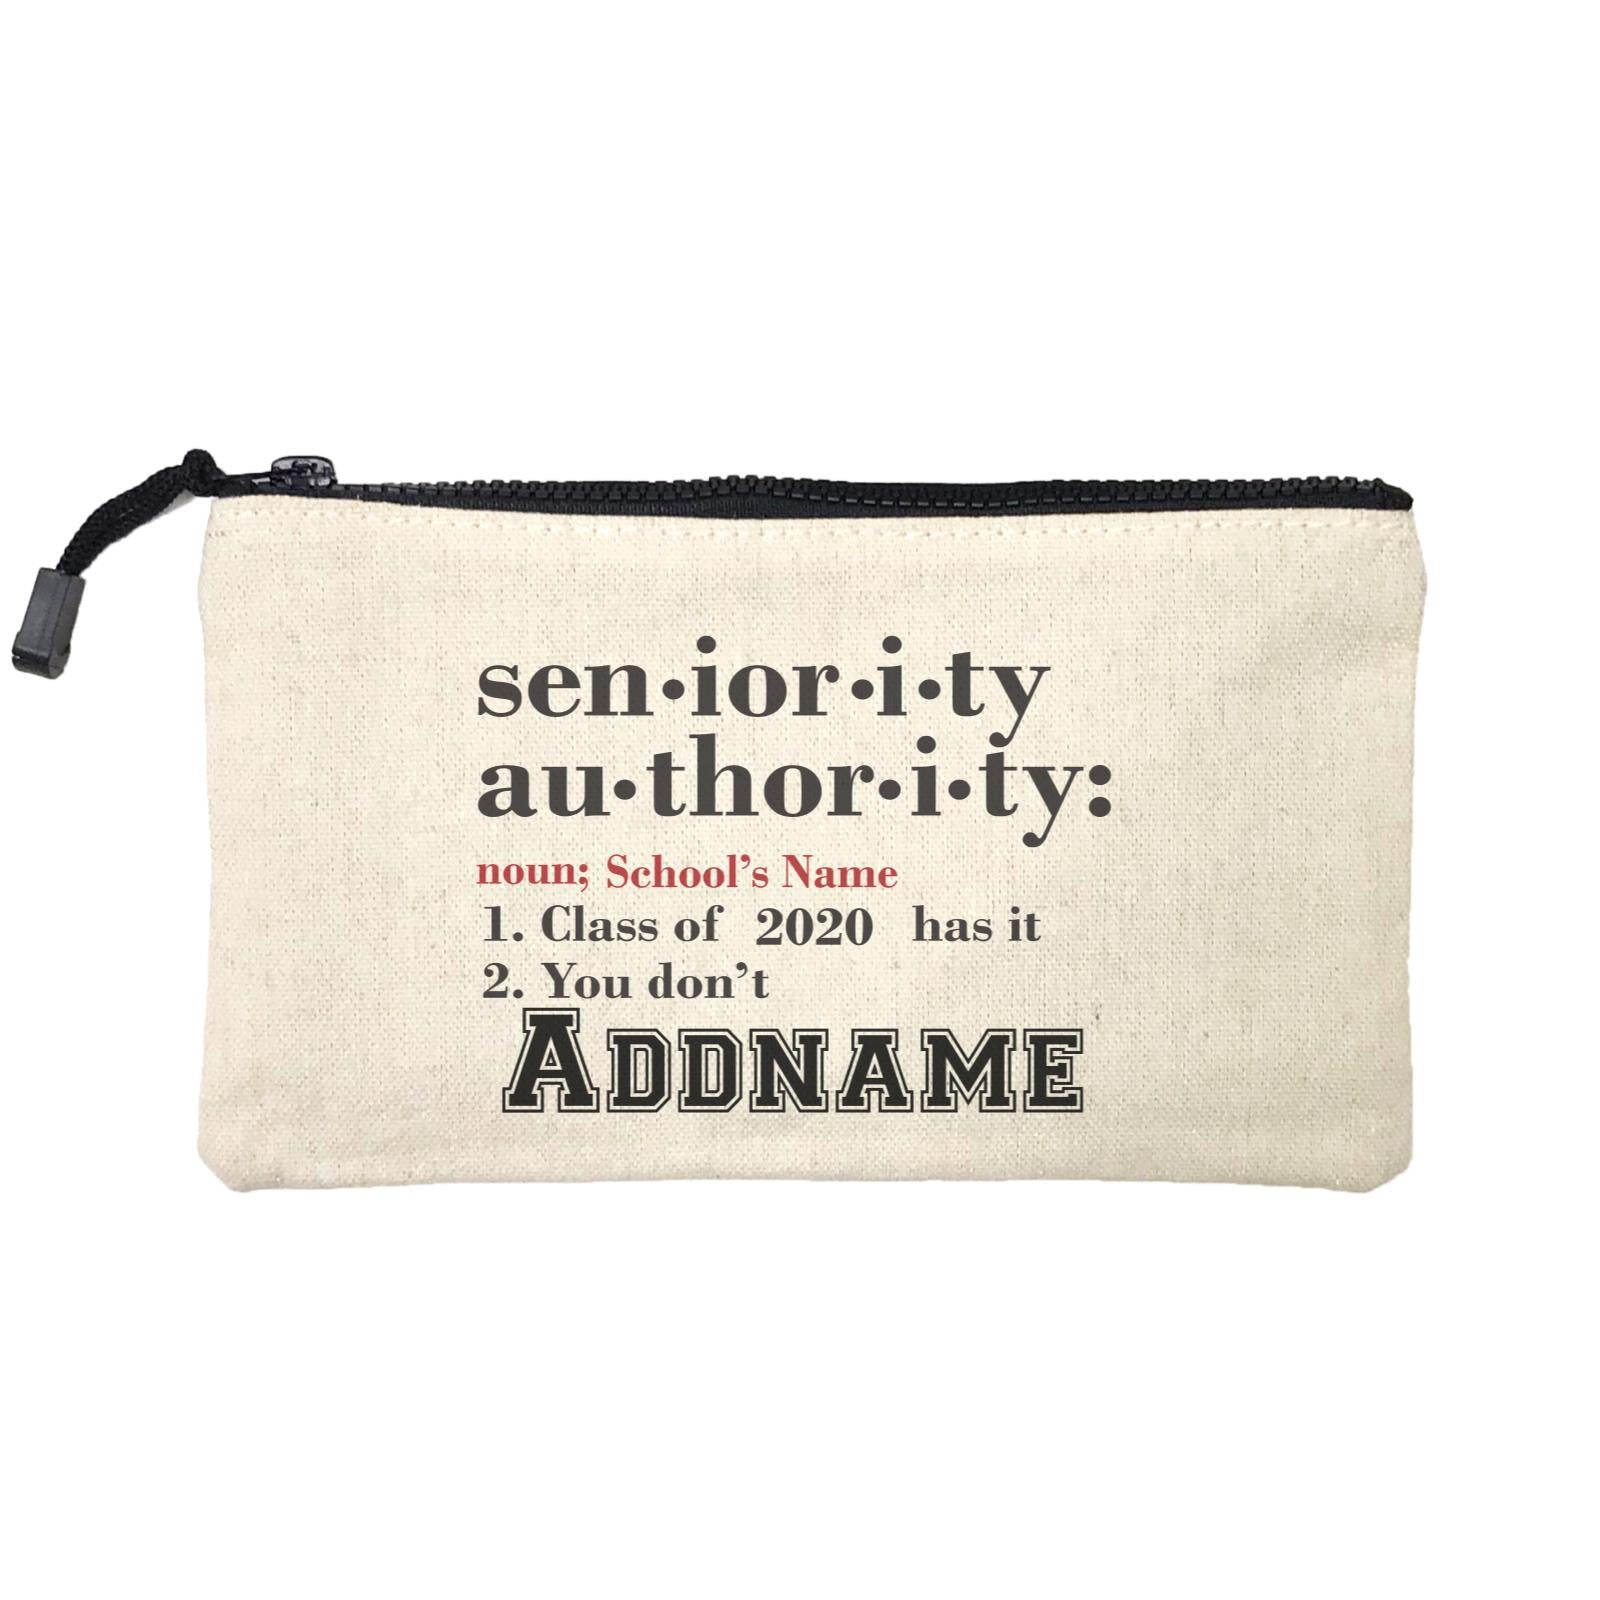 Graduation Series Seniority, Authority Mini Accessories Stationery Pouch